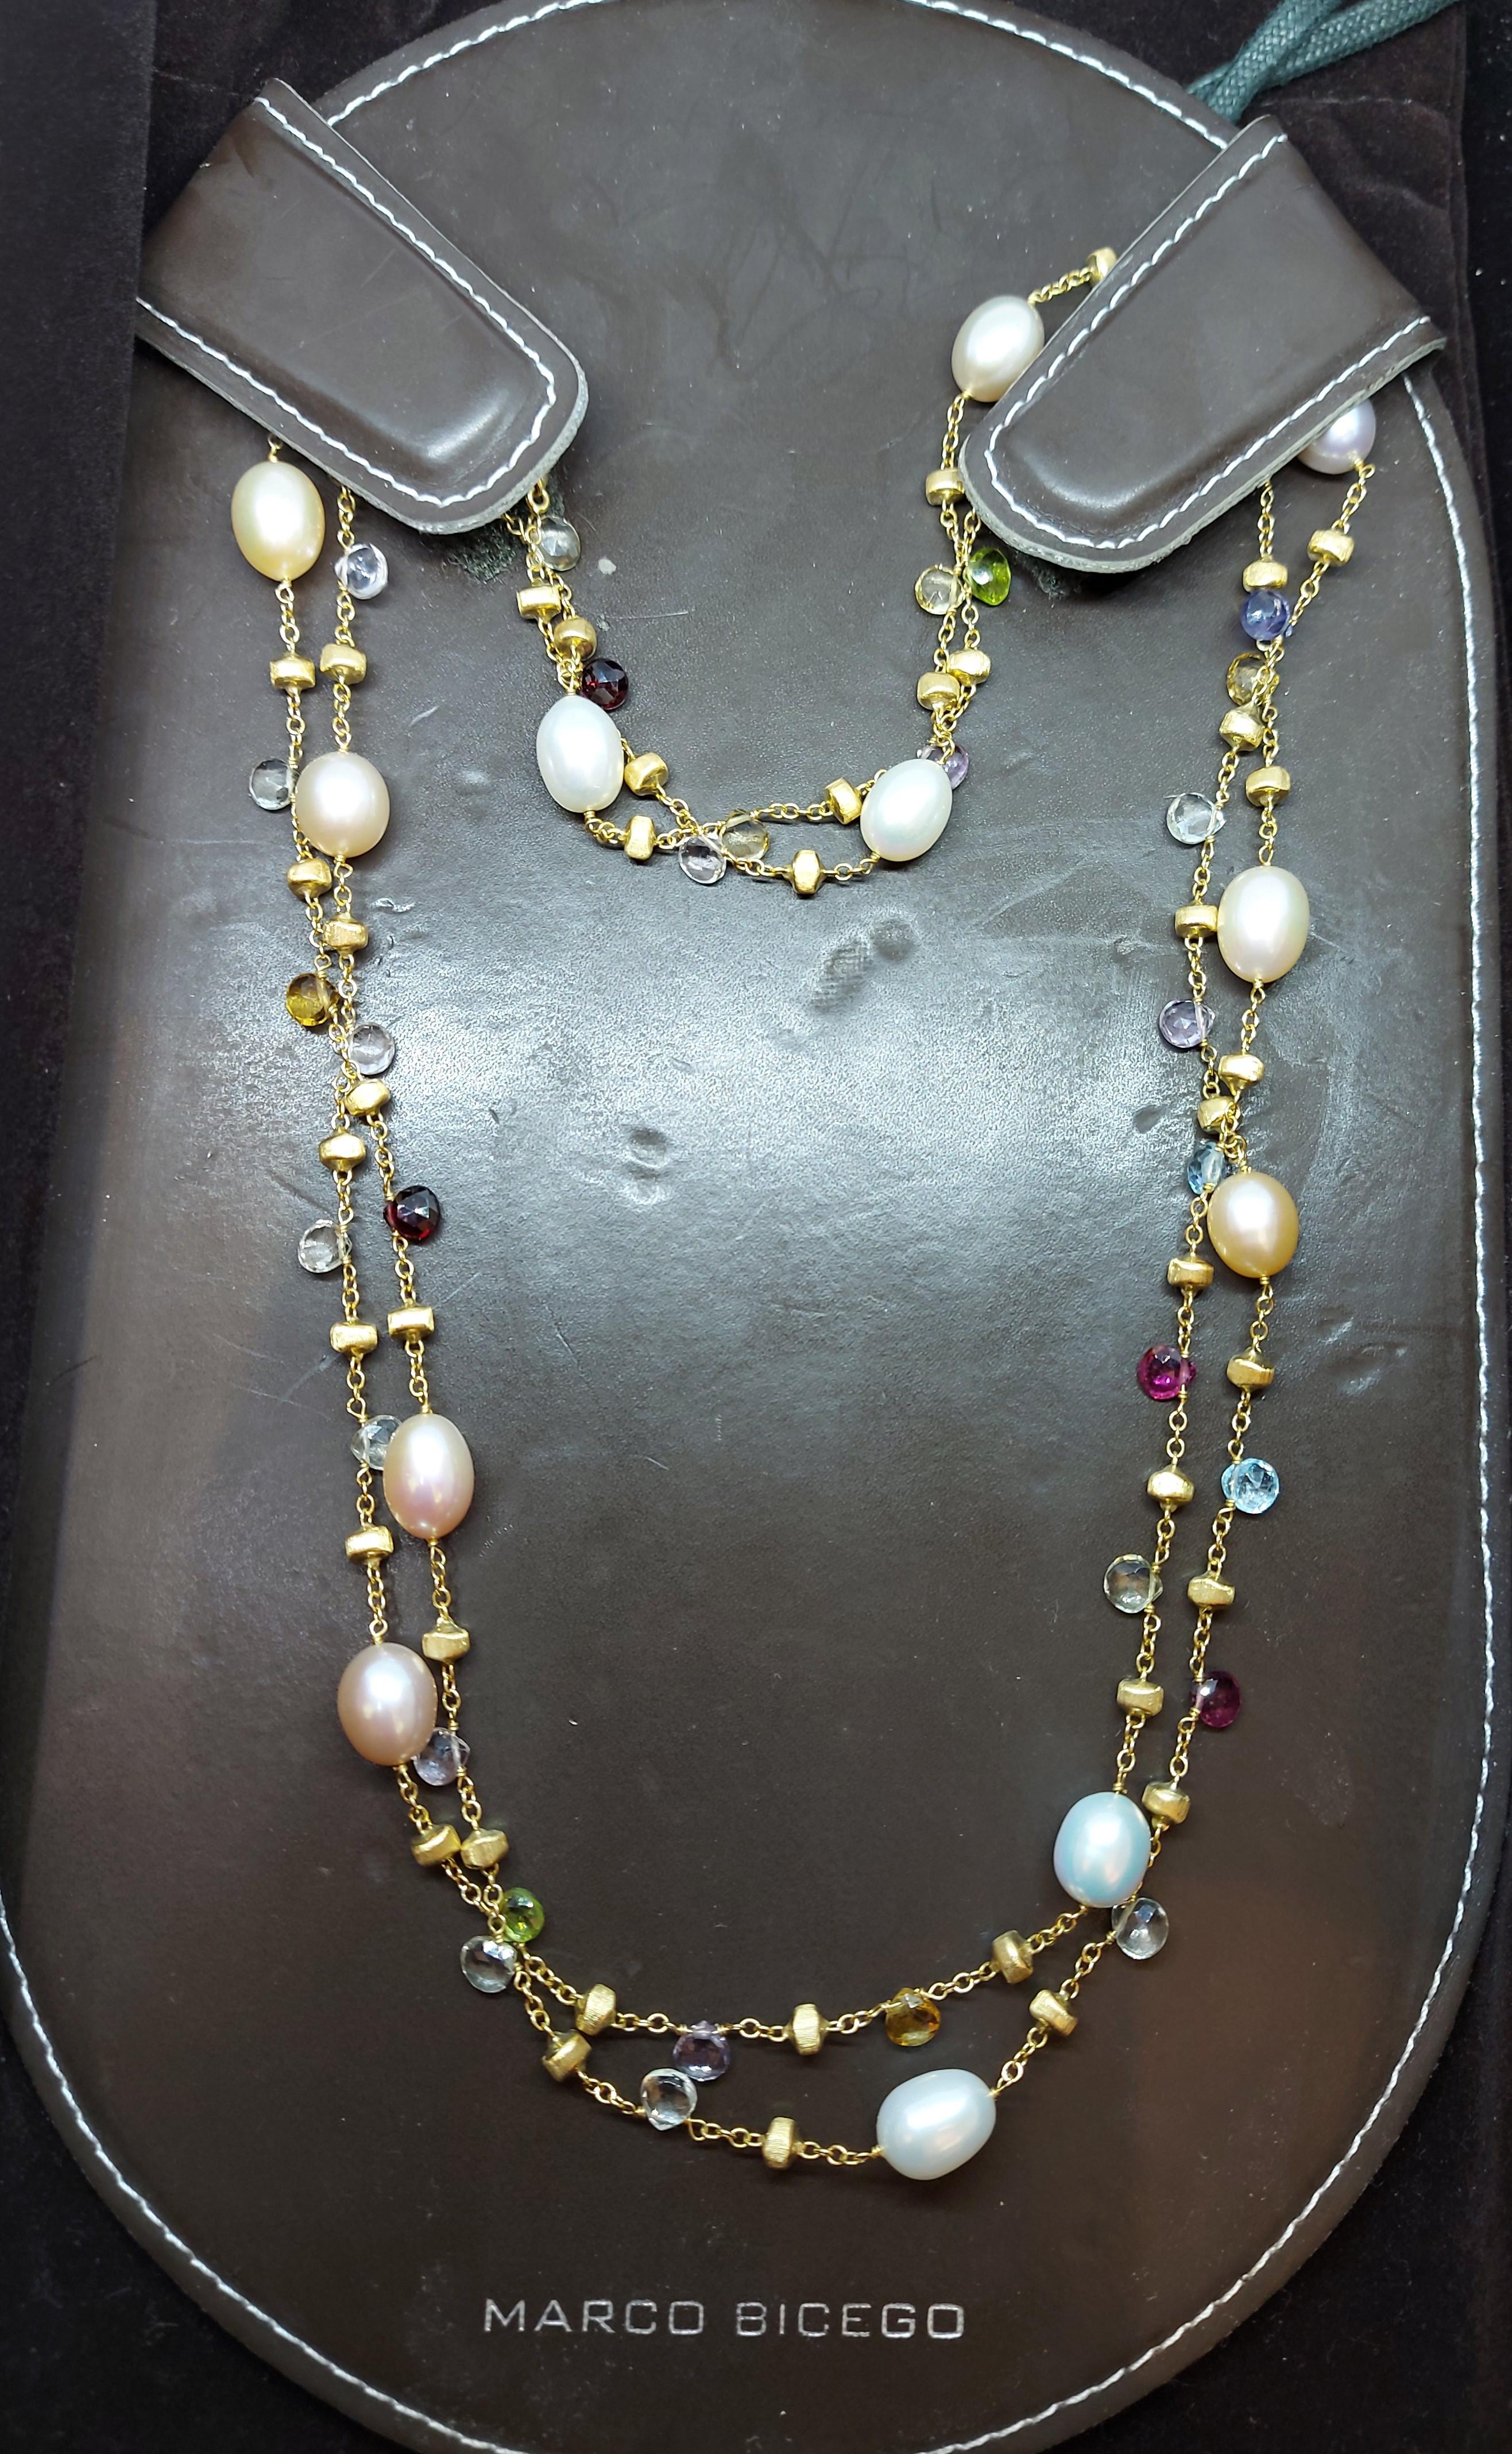 18kt Gold Marco Bicego Long Necklace, Paradise Collection, Pearls & Gemstones 3